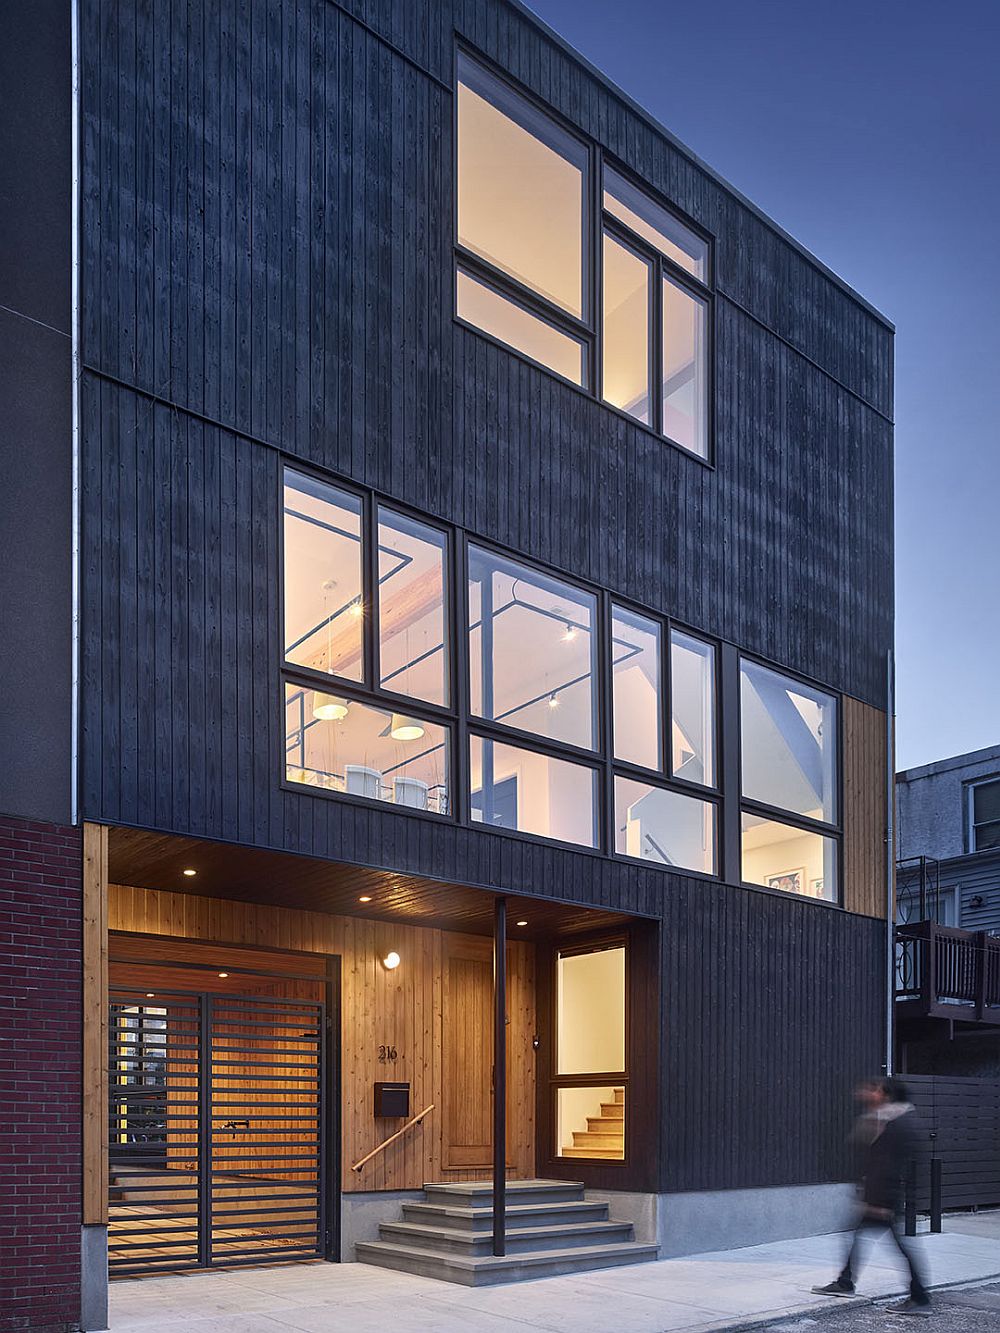 Cypress wood siding shapes the exterior of the house